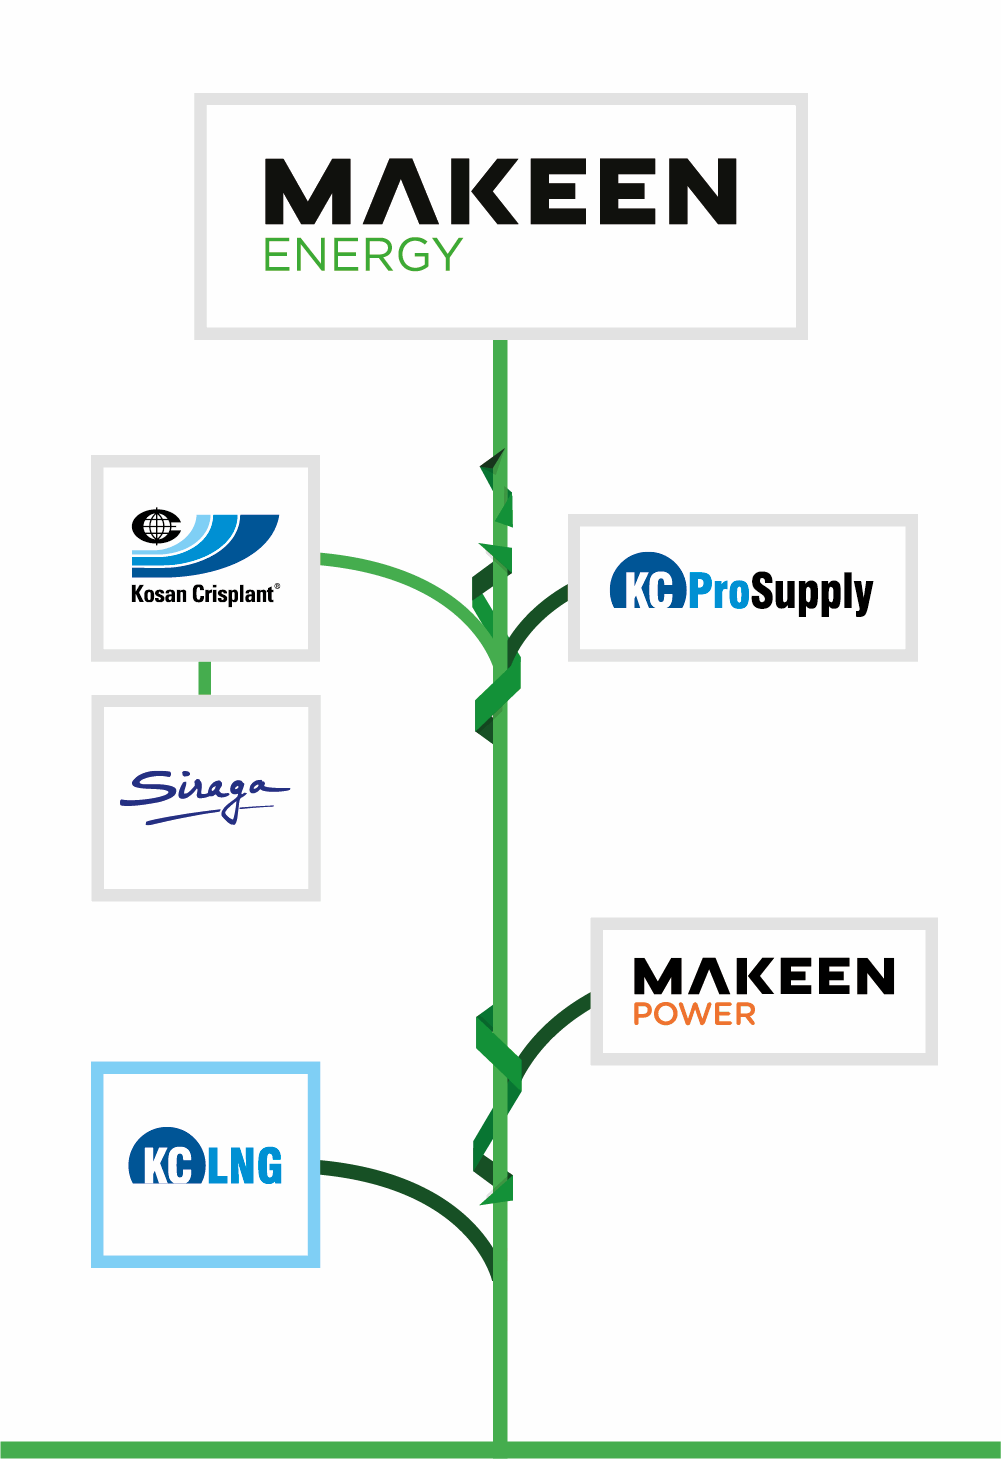 MAKEEN Energy tree with all of the company's brands